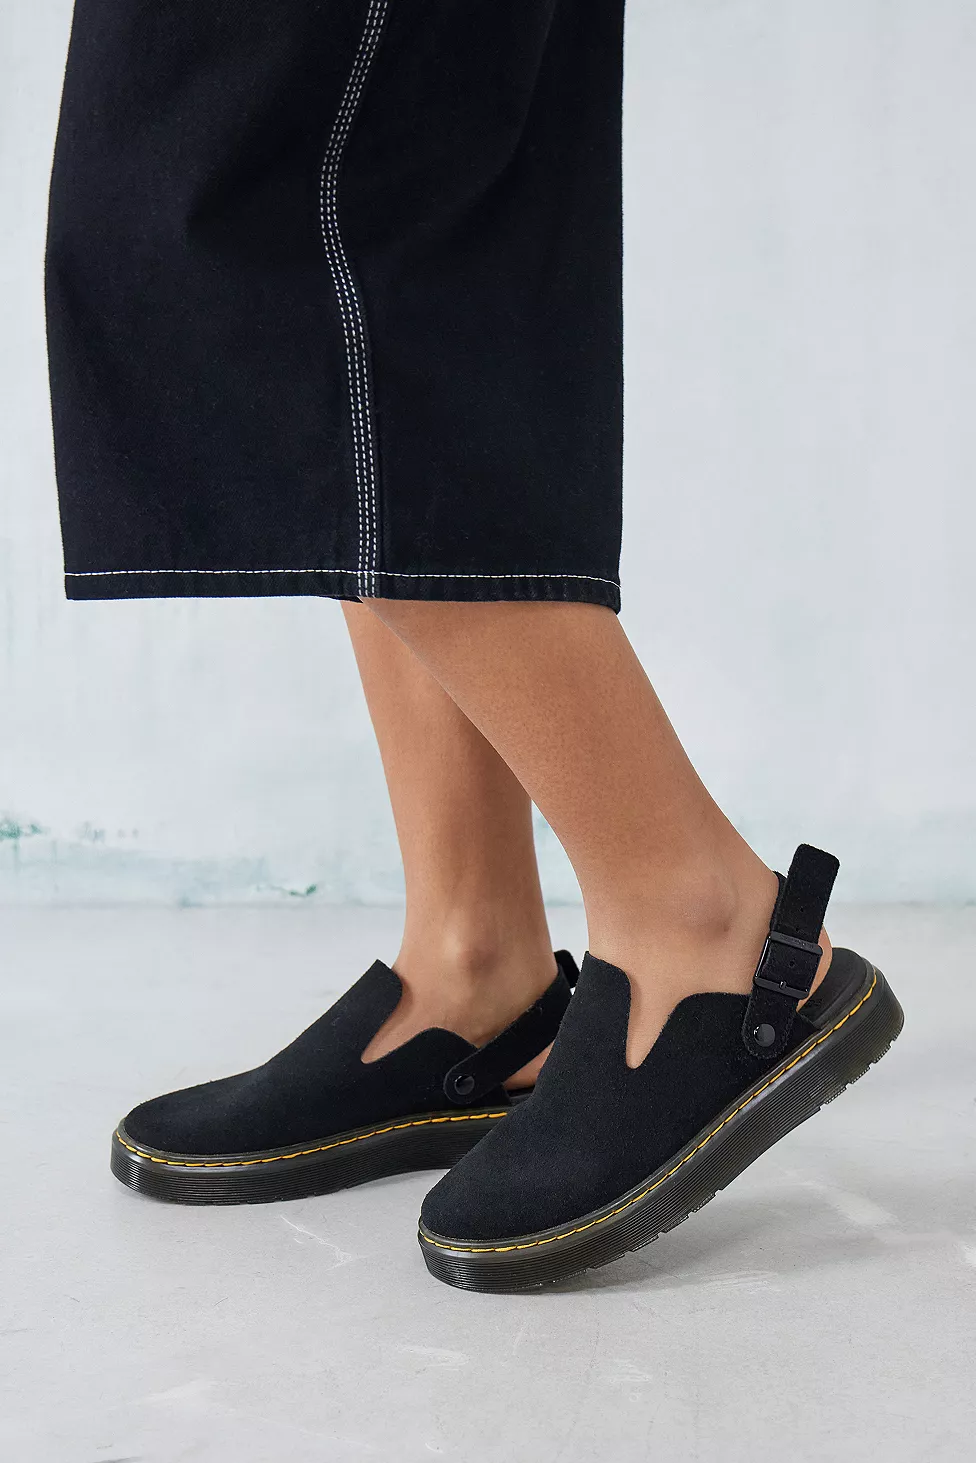 UO Dr. Martens Black Carlson Suede Shoes